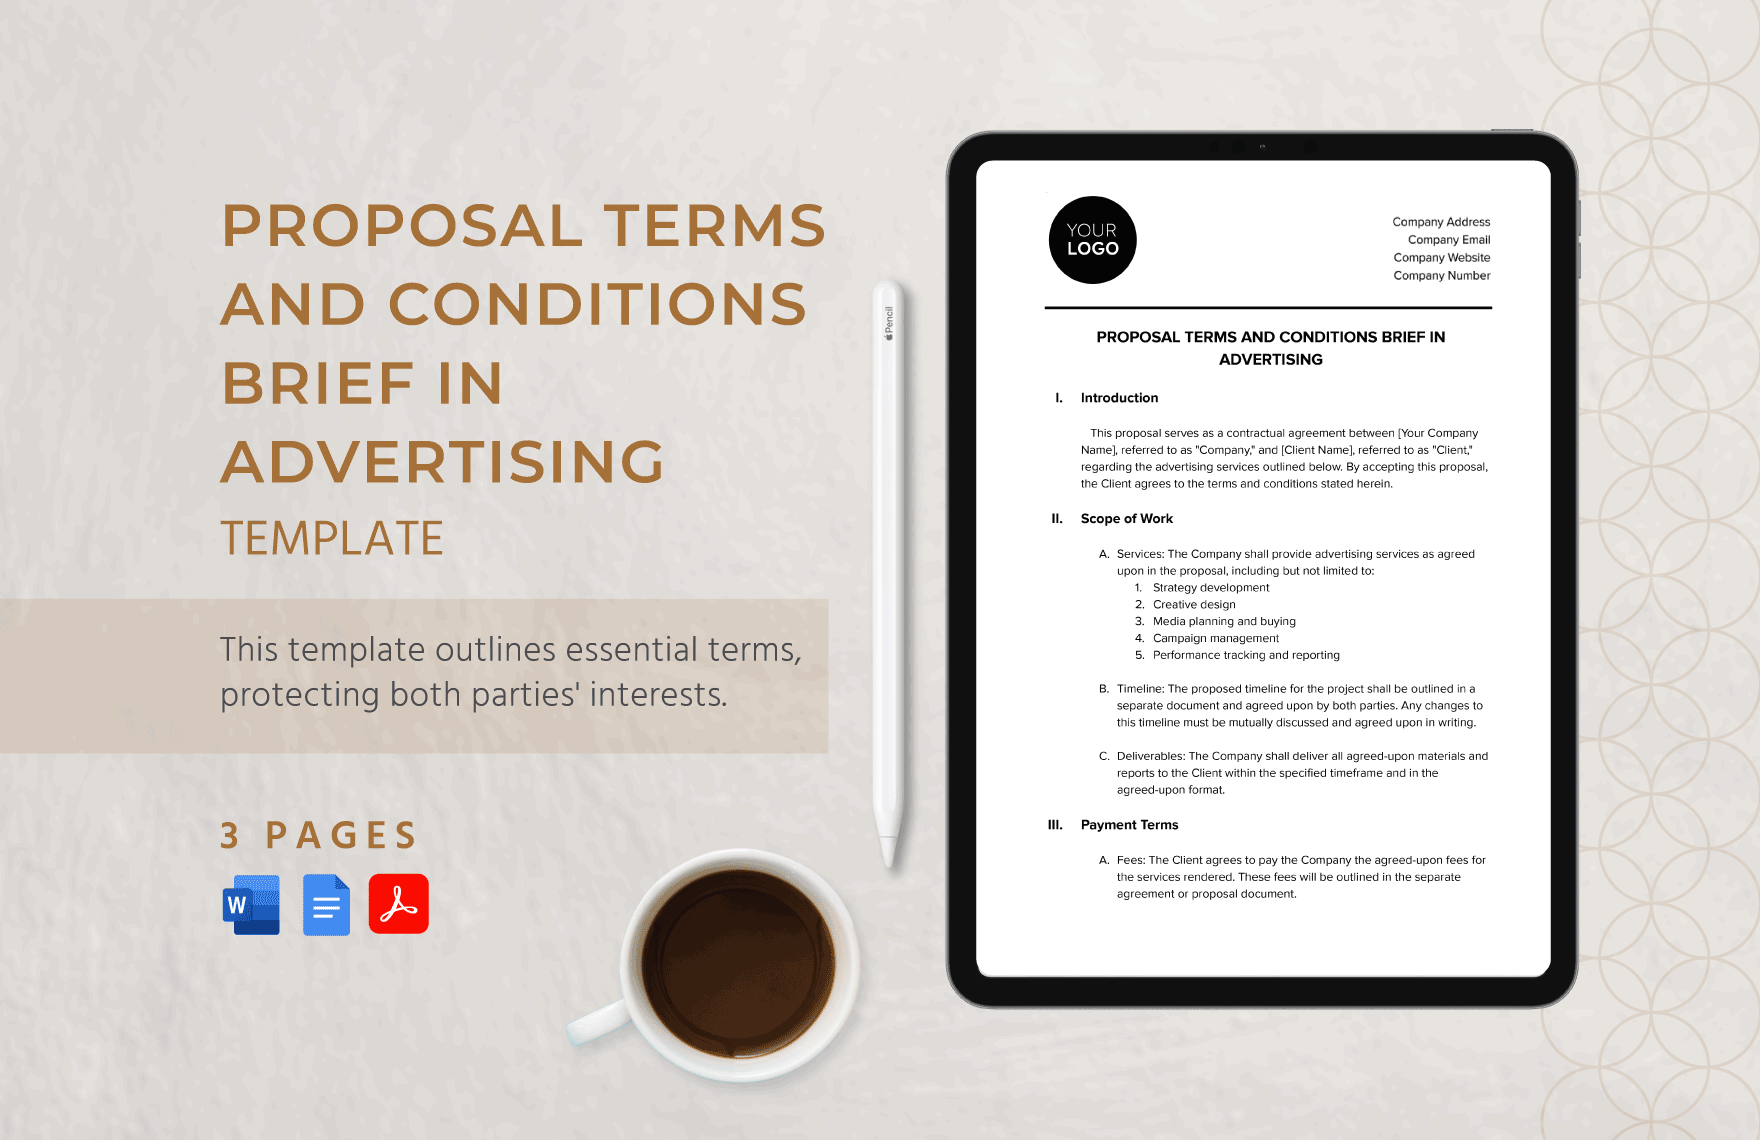 Proposal Terms and Conditions Brief in Advertising Template